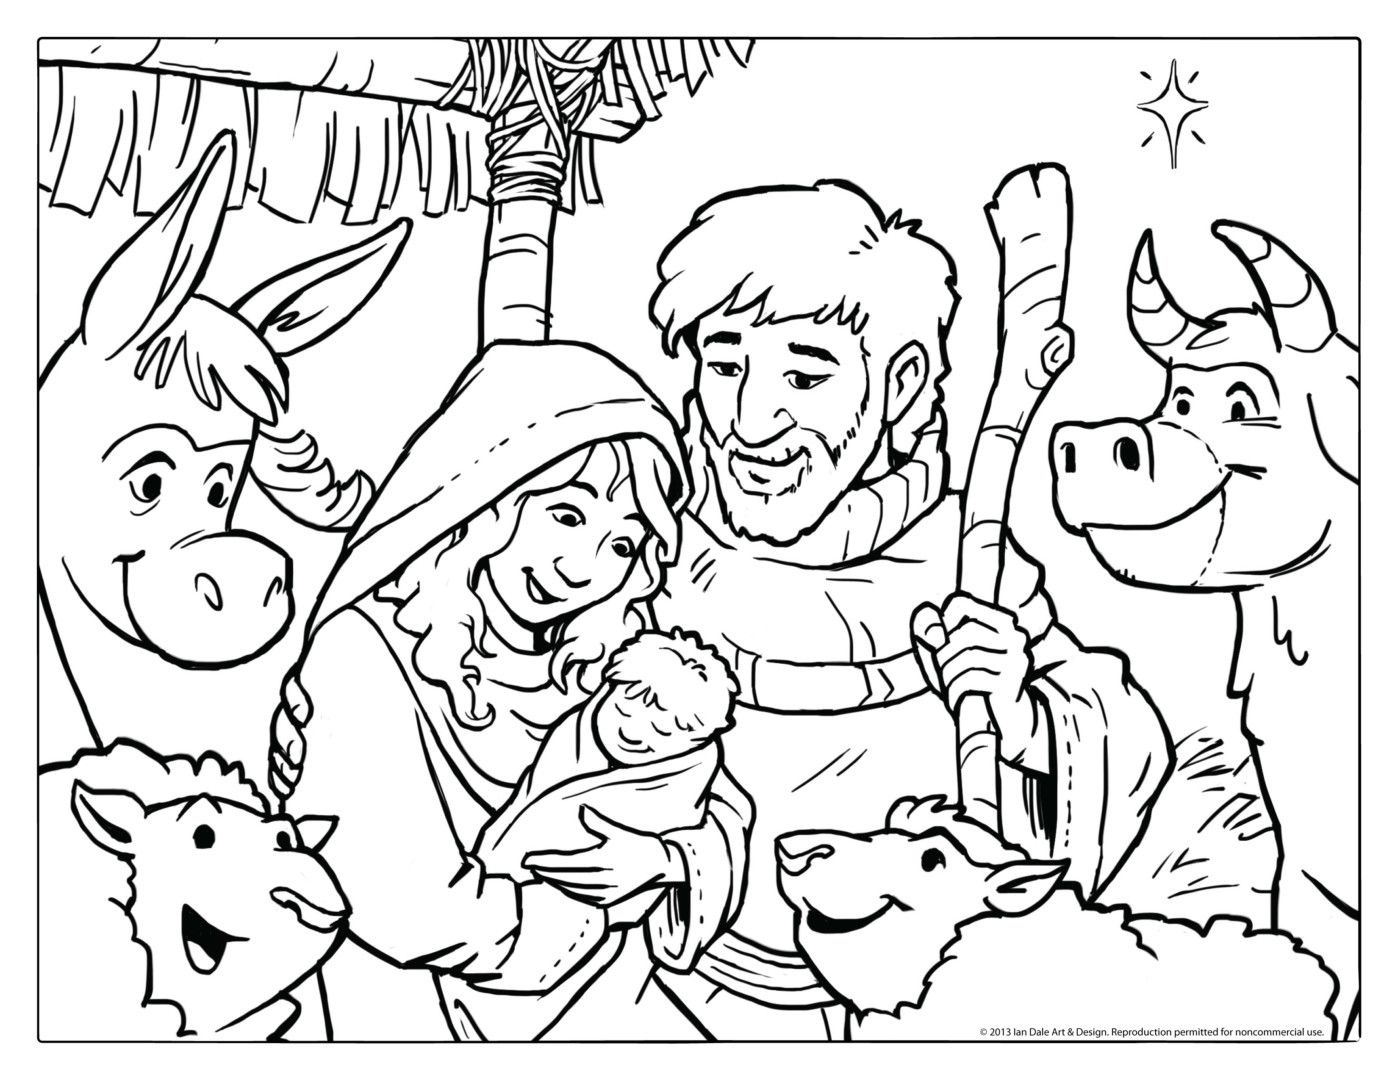 Coloring Pages : Nativity Scene Coloring Page Foroolers Of Number - Free Printable Nativity Scene Pictures